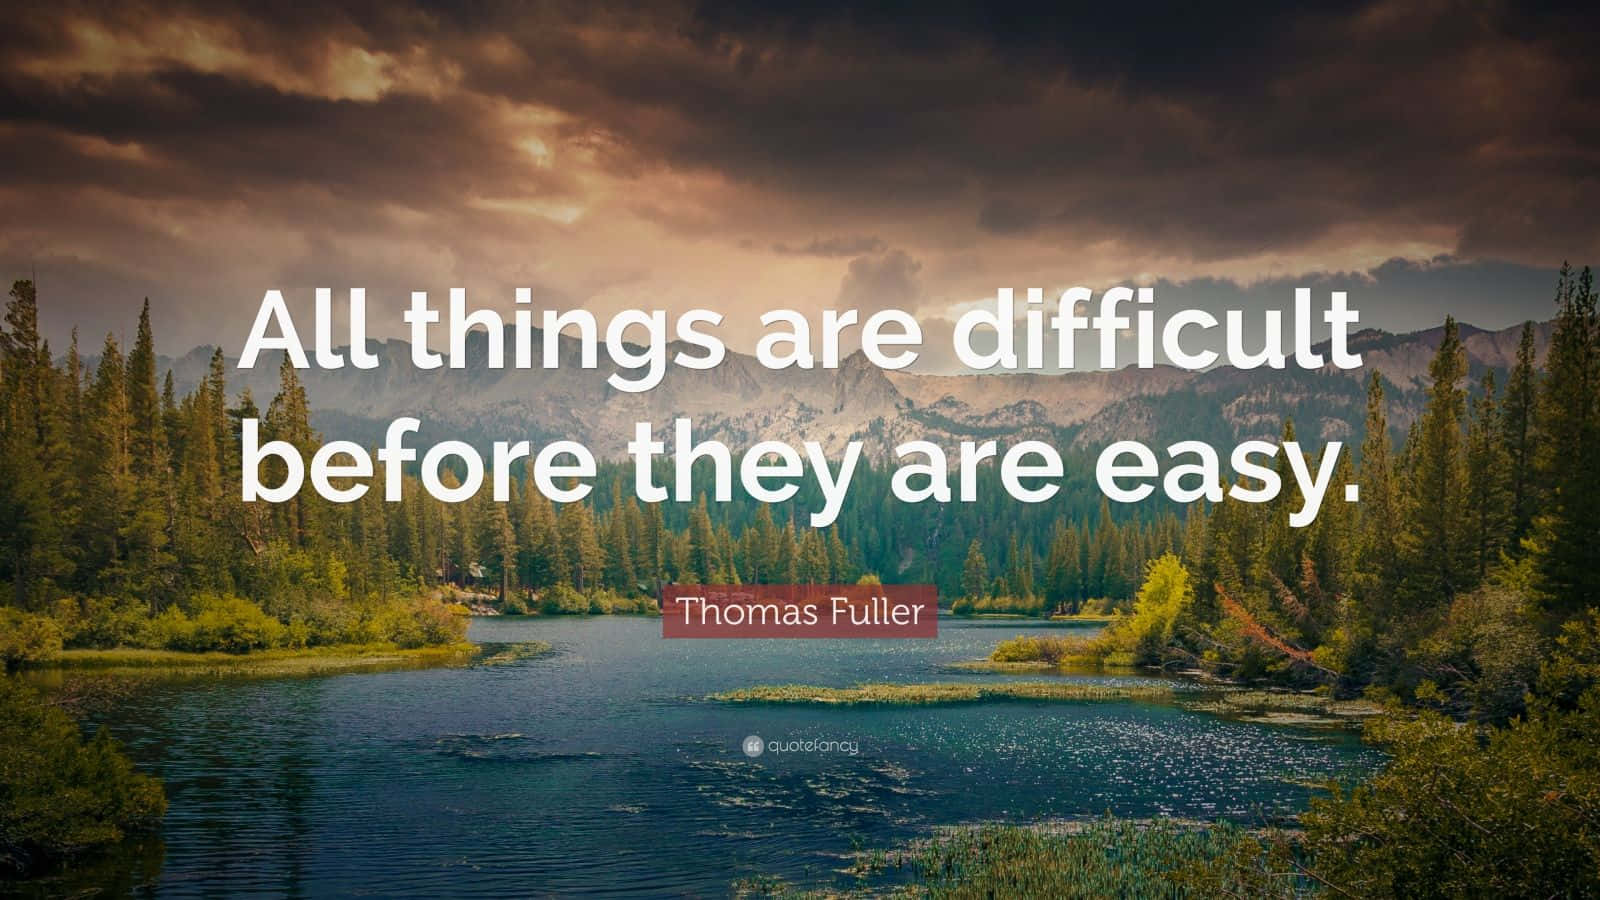 Inspirational quote about the concept of arduousness by Thomas Fuller Wallpaper